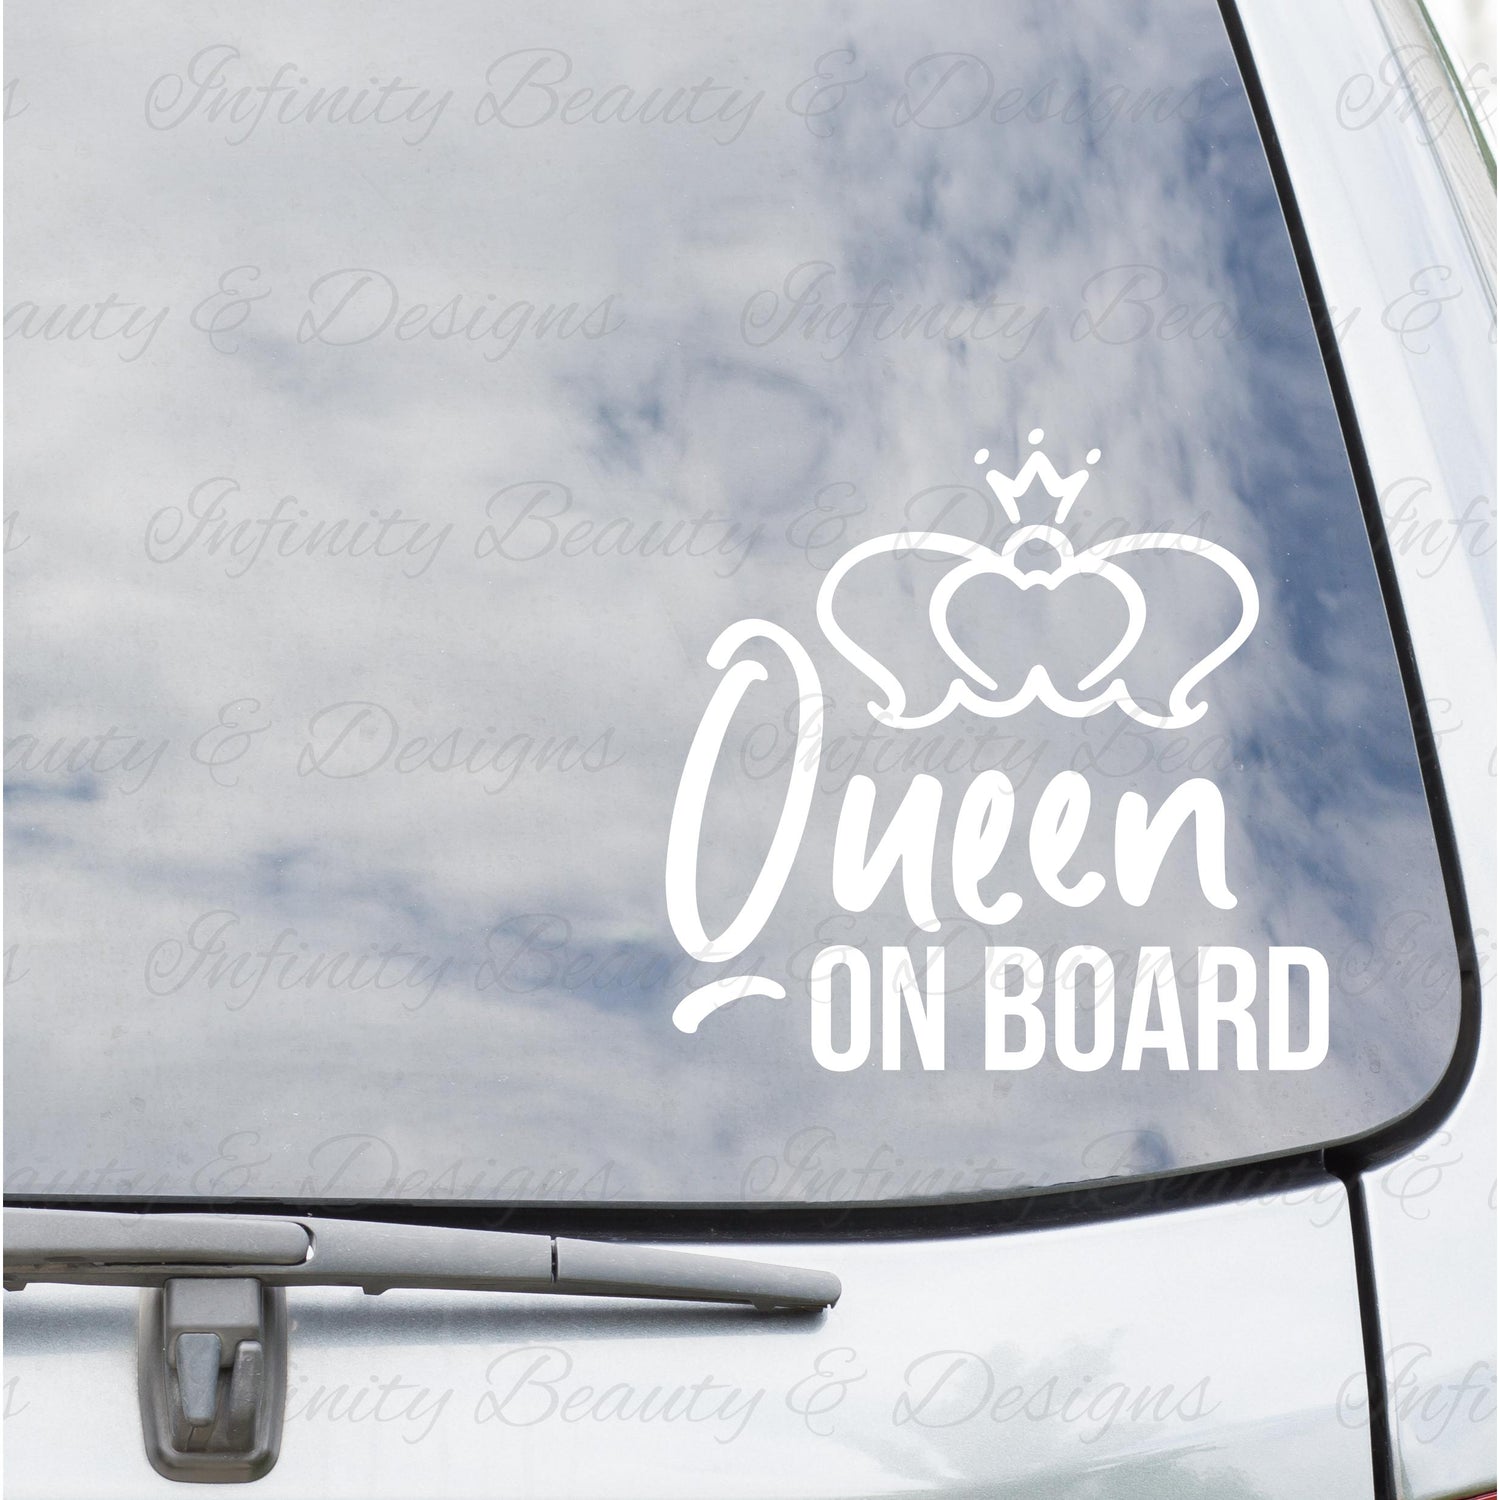 Baby on Board Decal - Queen-Infinity Beauty & Designs